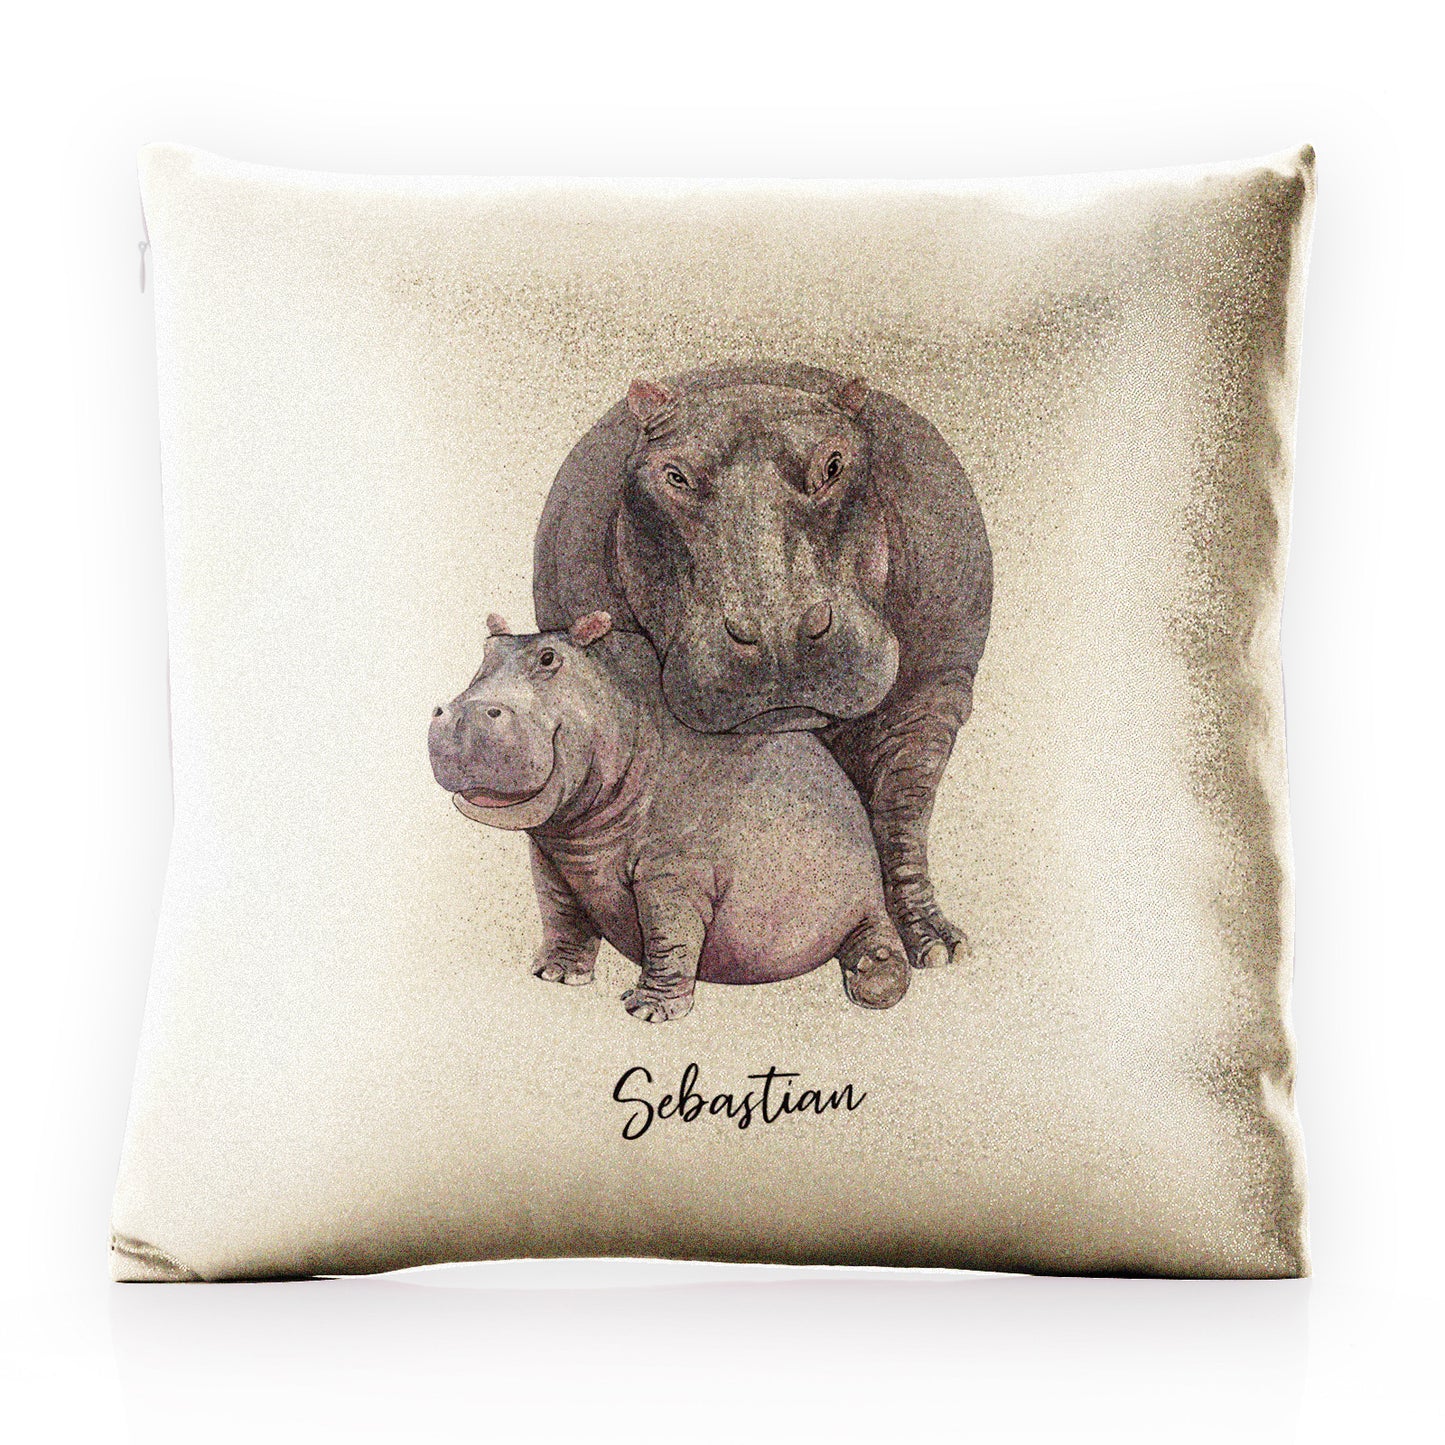 Personalised Glitter Cushion with Welcoming Text and Embracing Mum and Baby Hippos